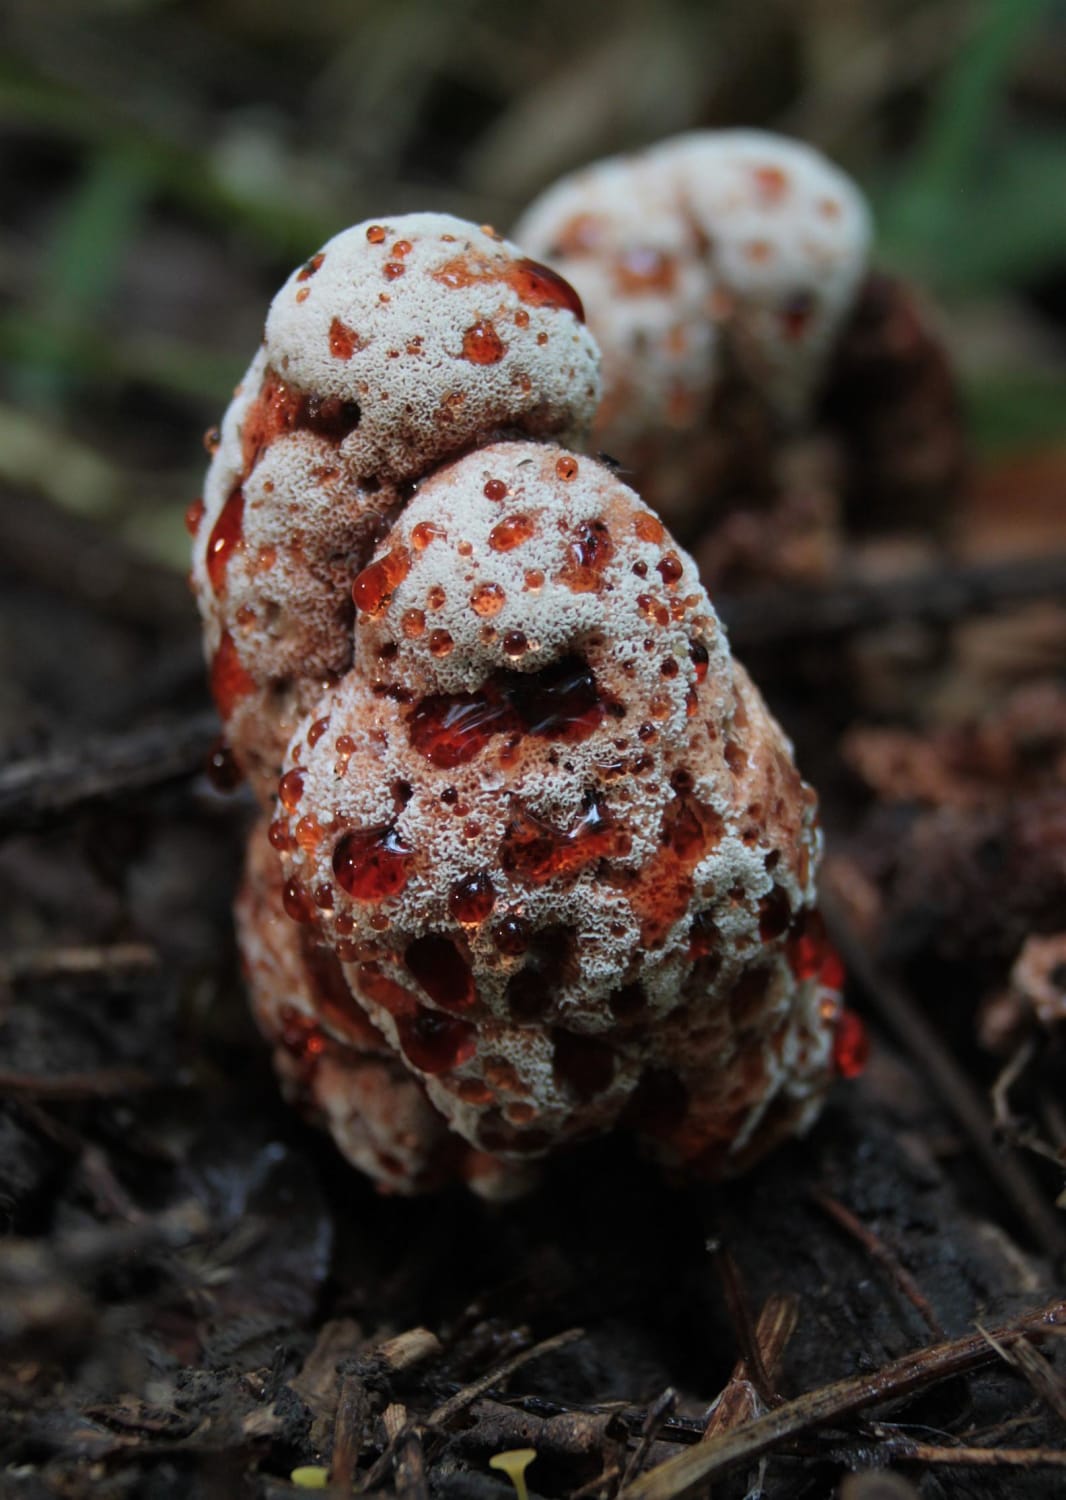 Abortiporus biennis (Polyporales) is a wood decomposing fungus common to temperate forests of the Northern hemisphere.